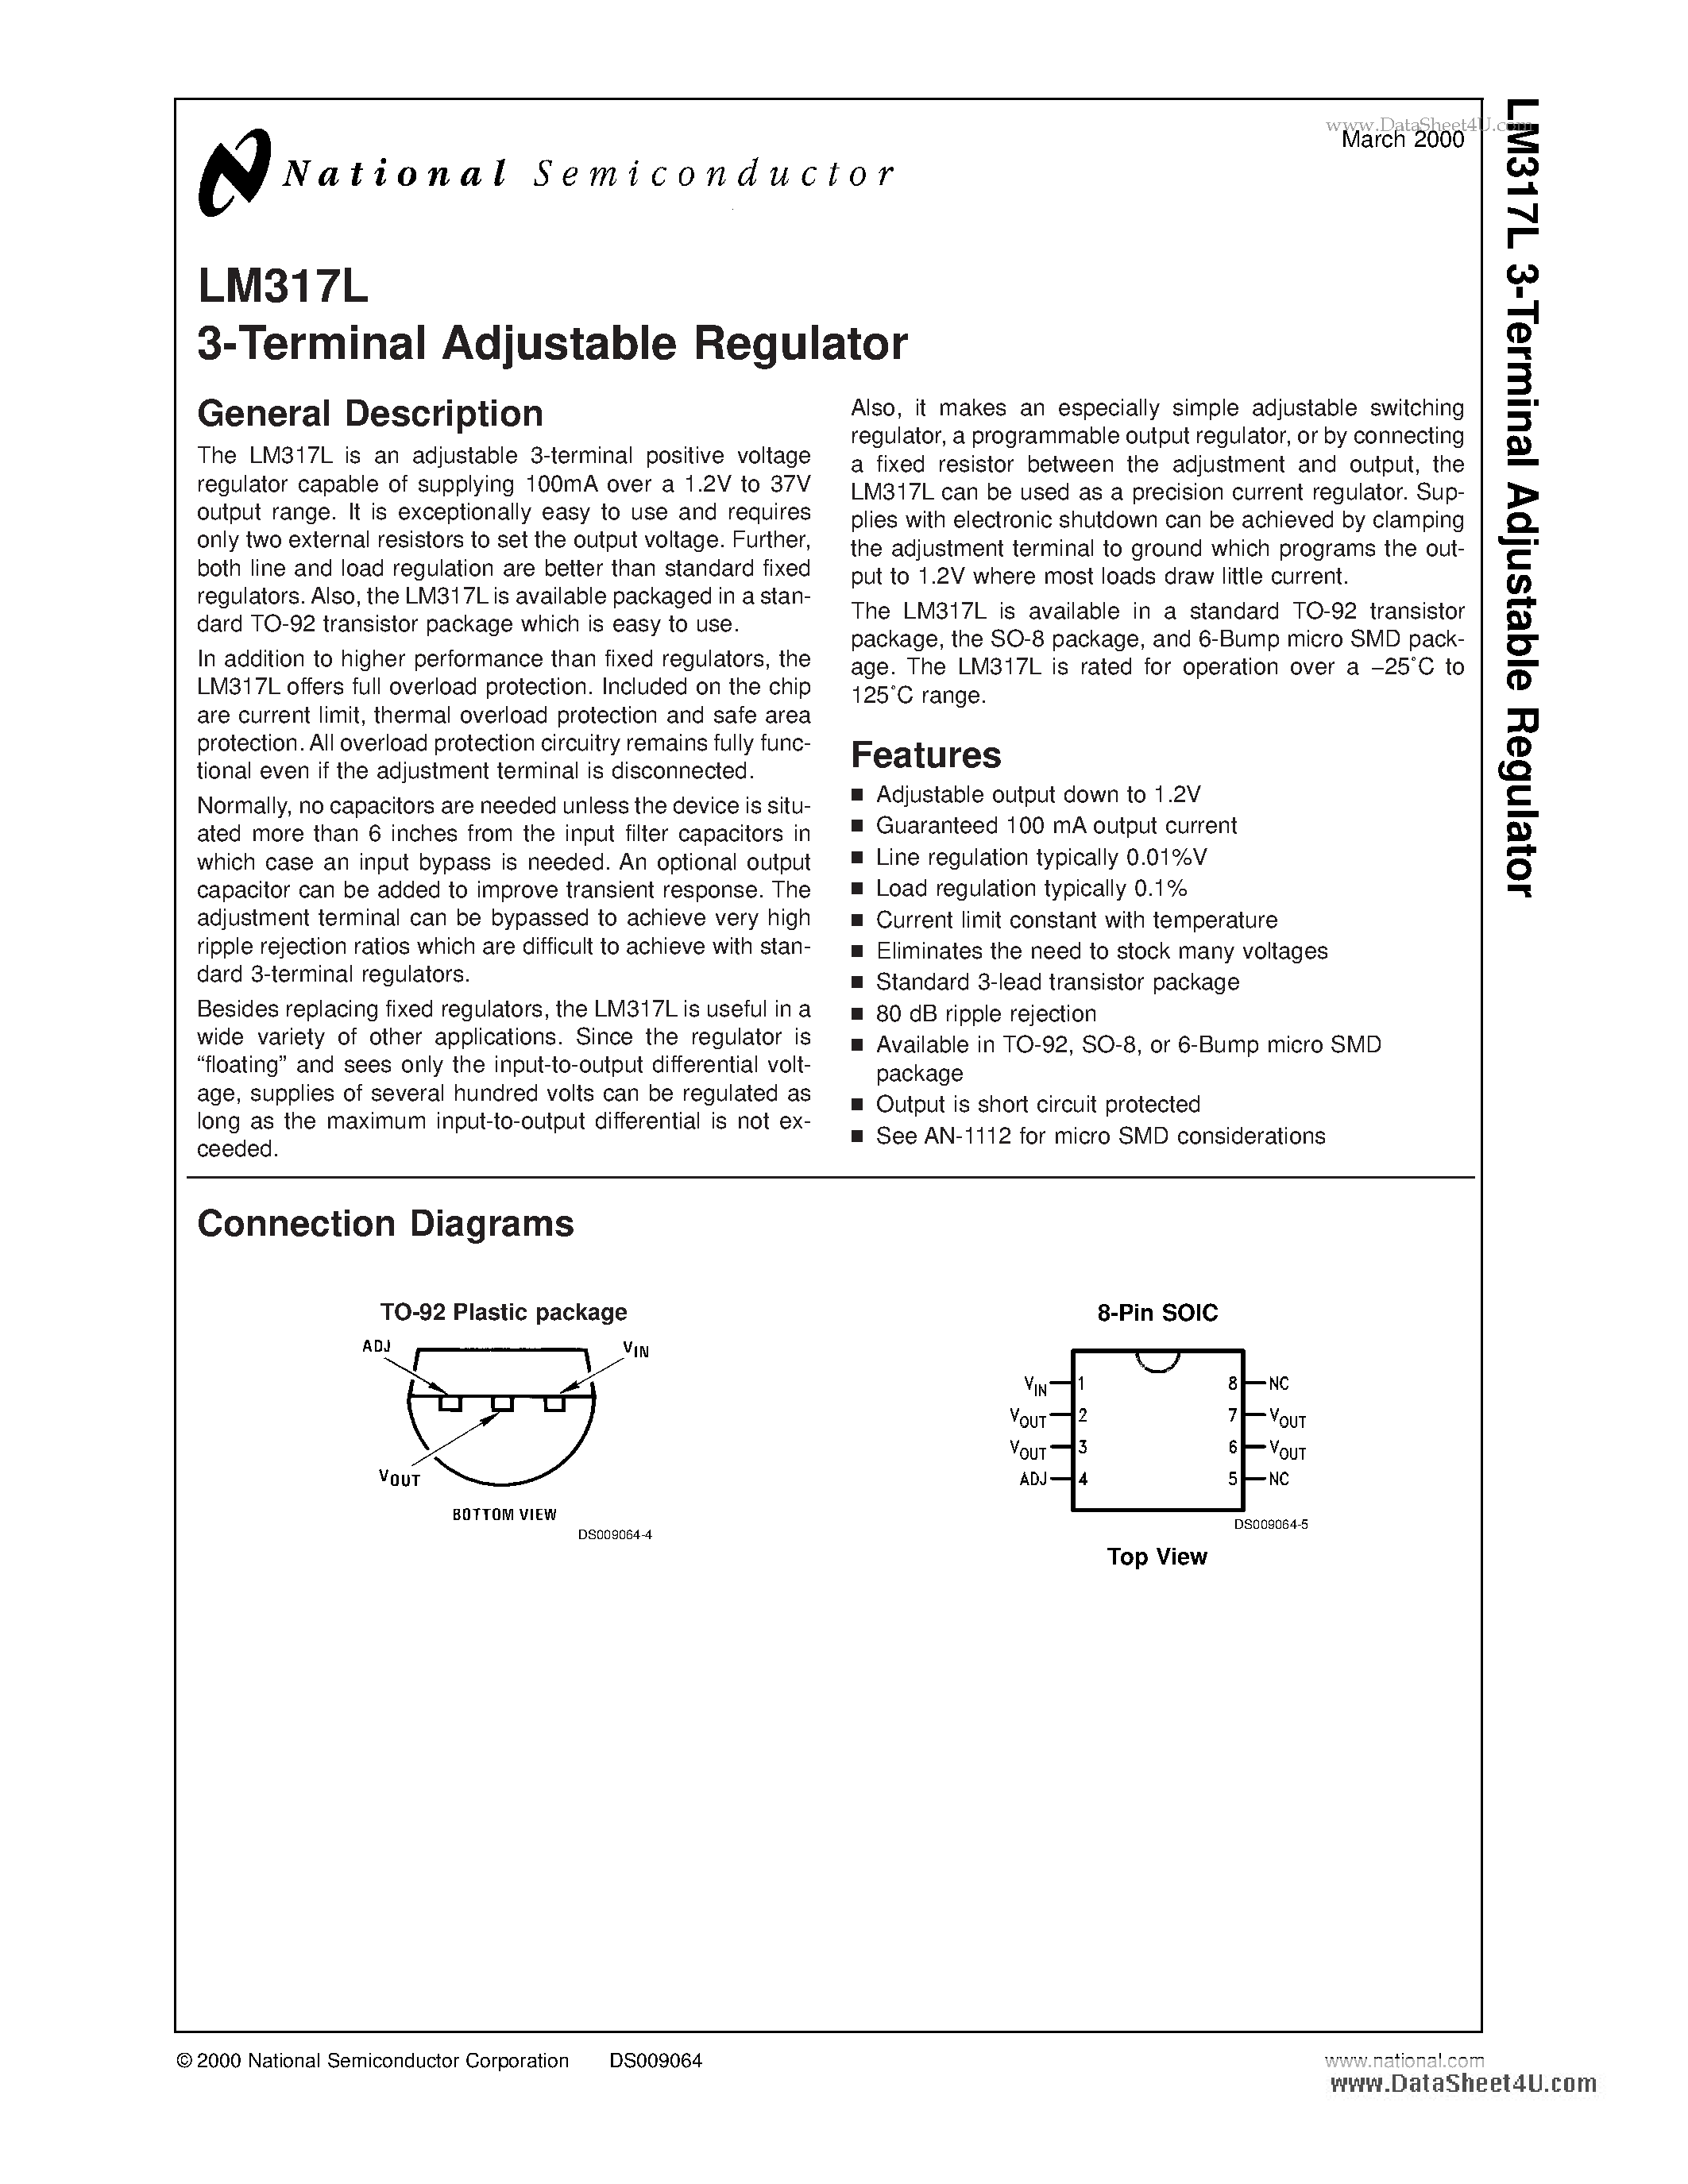 Datasheet 317LM - Search -----> LM317LM page 1